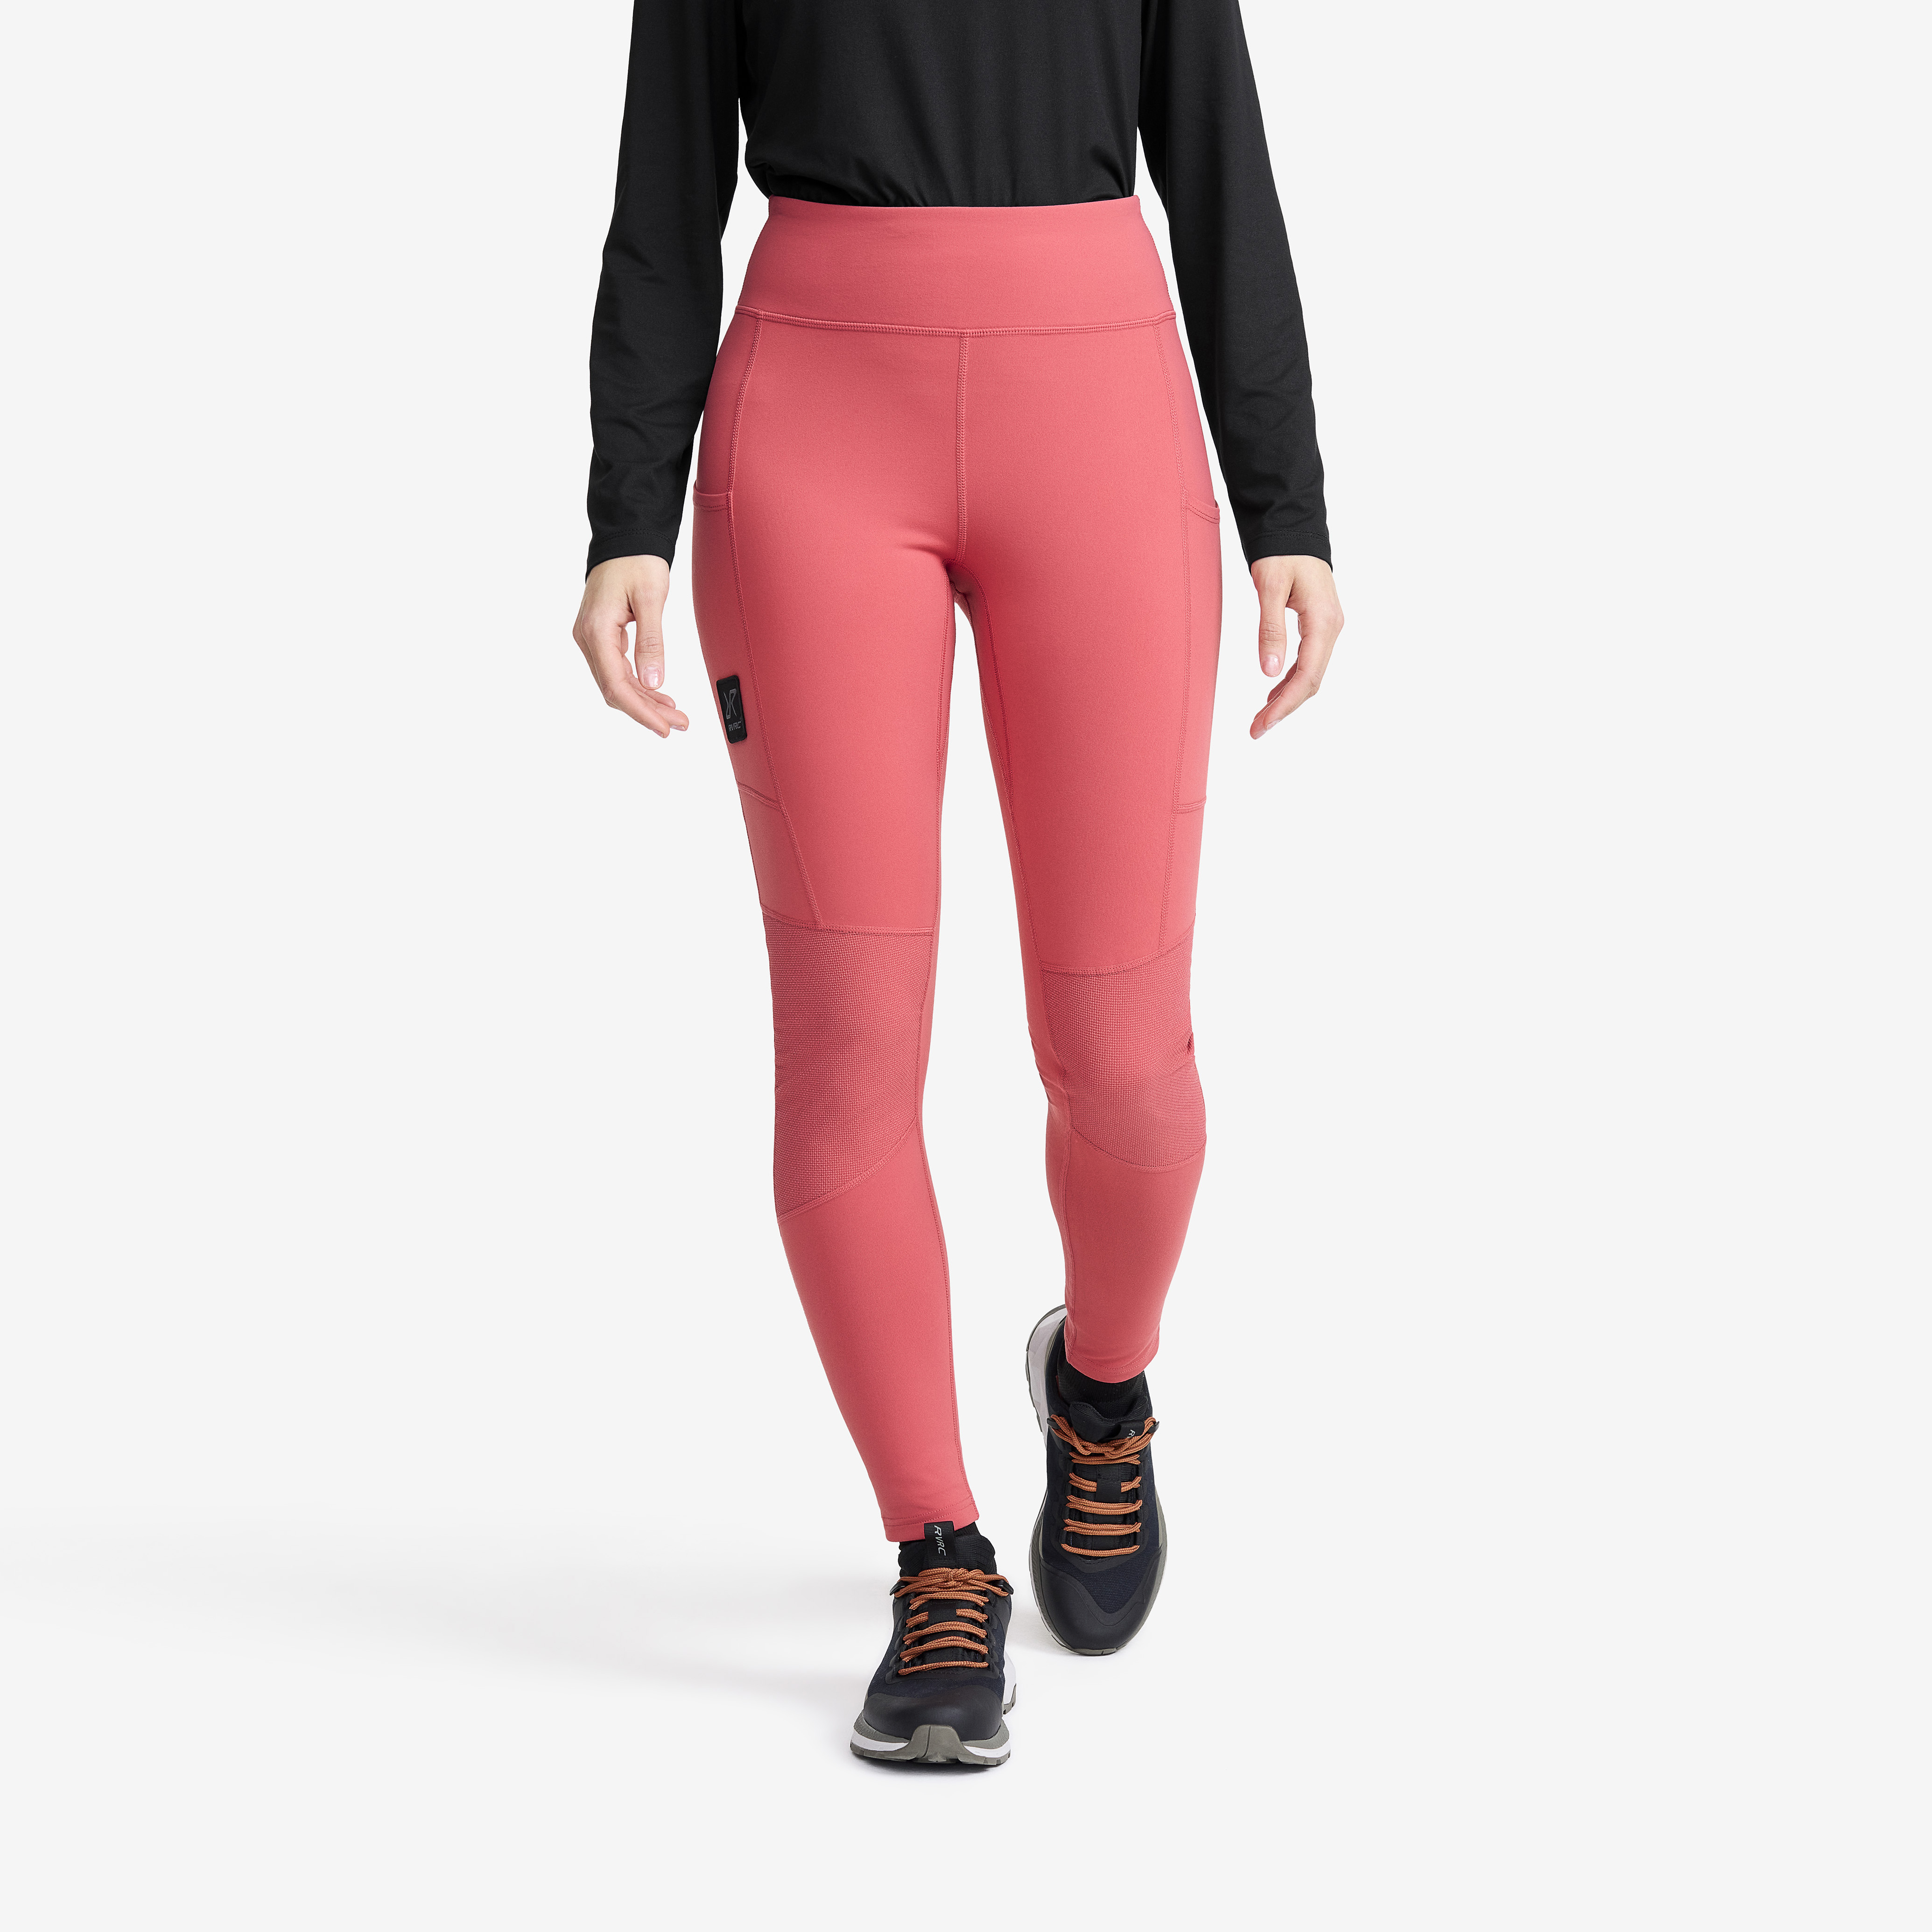 Summit Core Tights – Dam – Holly Berry Storlek:S – Outdoor Tights